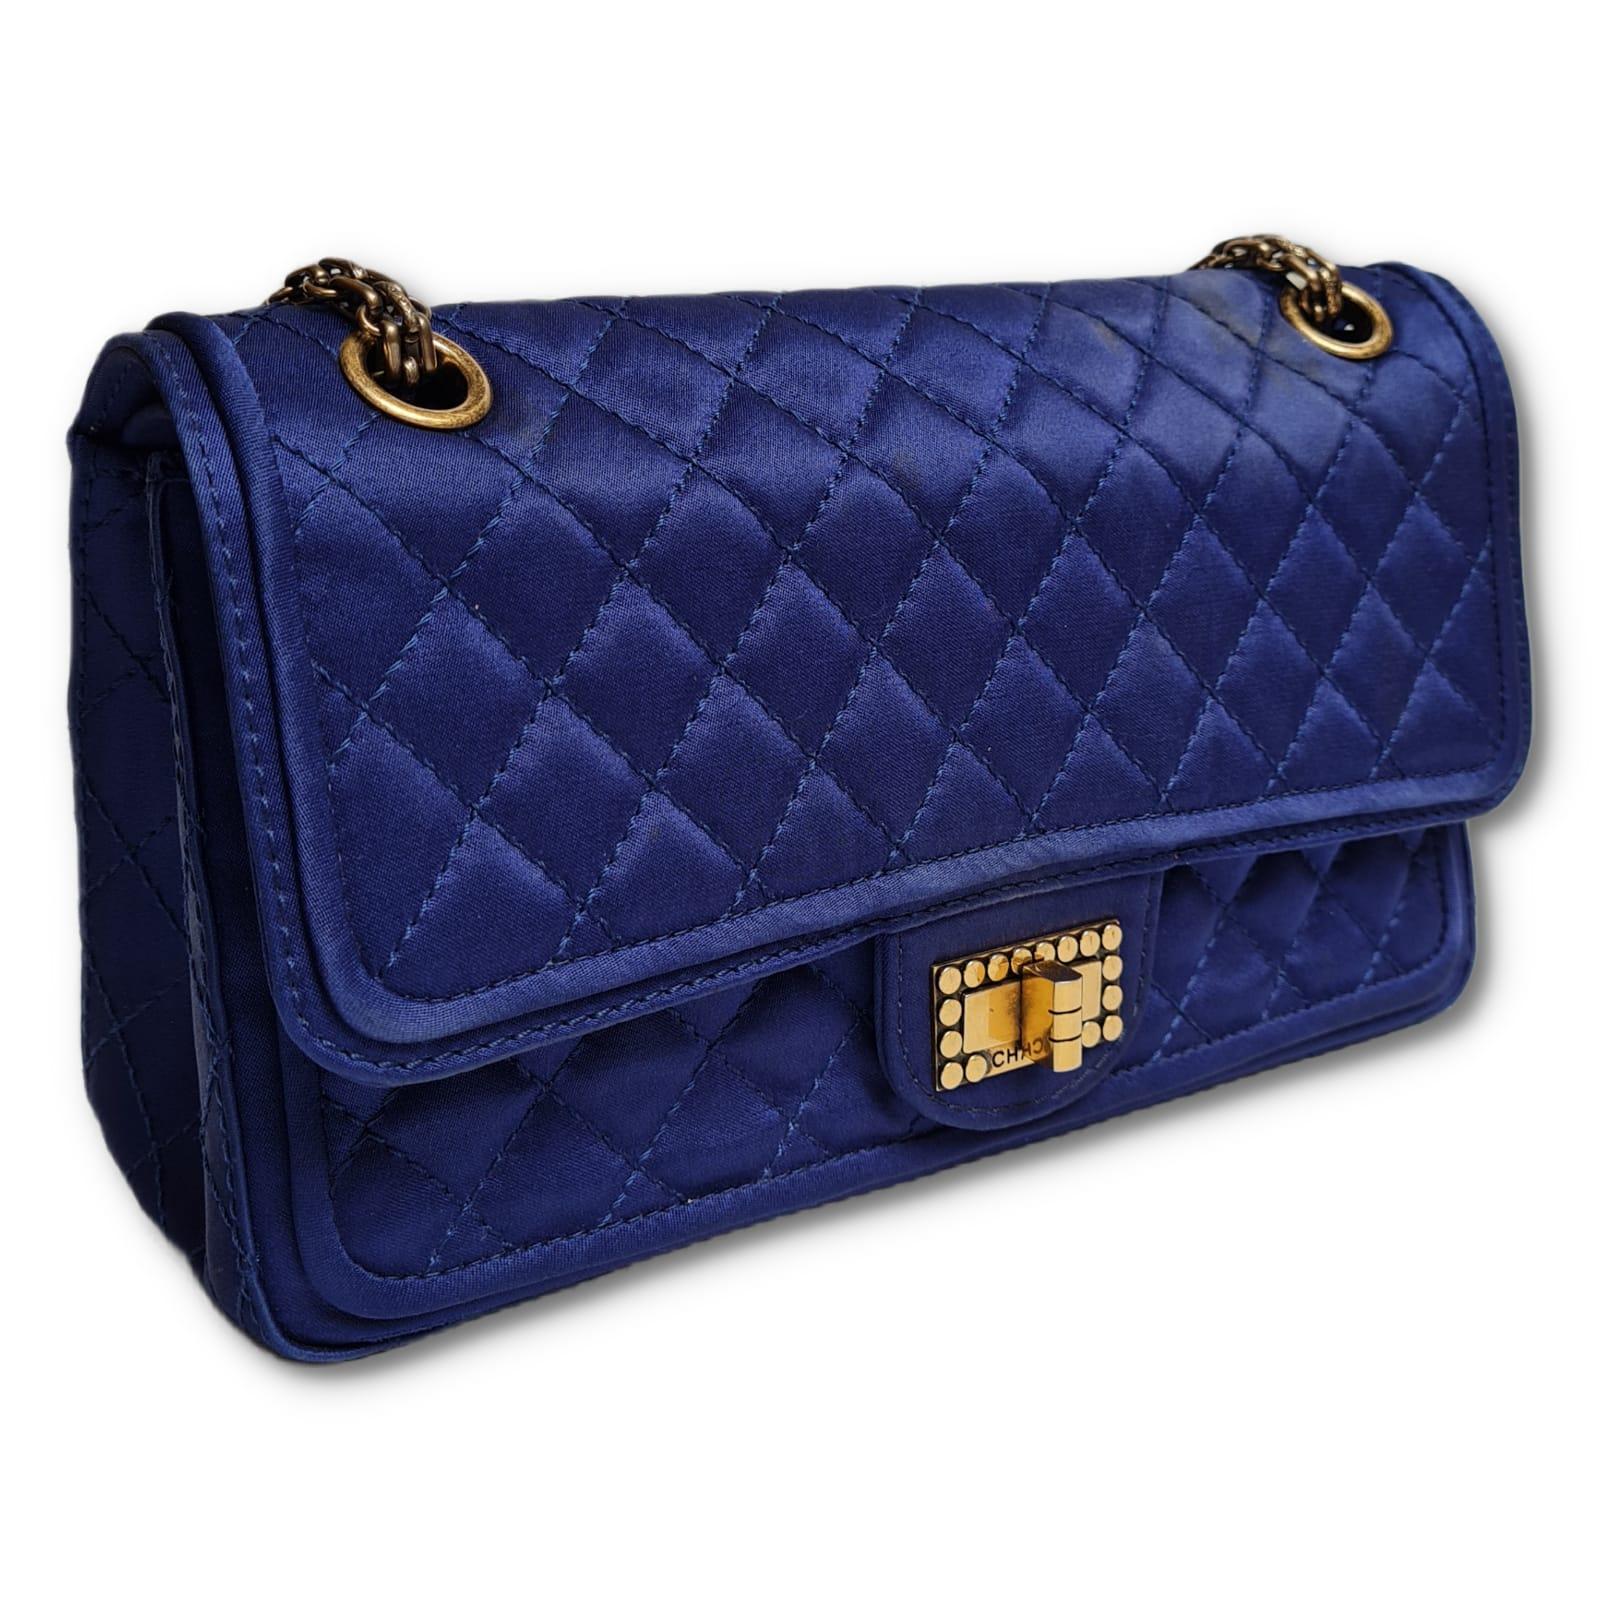 Chanel Medium Satin Quilted Reissue Flap Bag For Sale 7